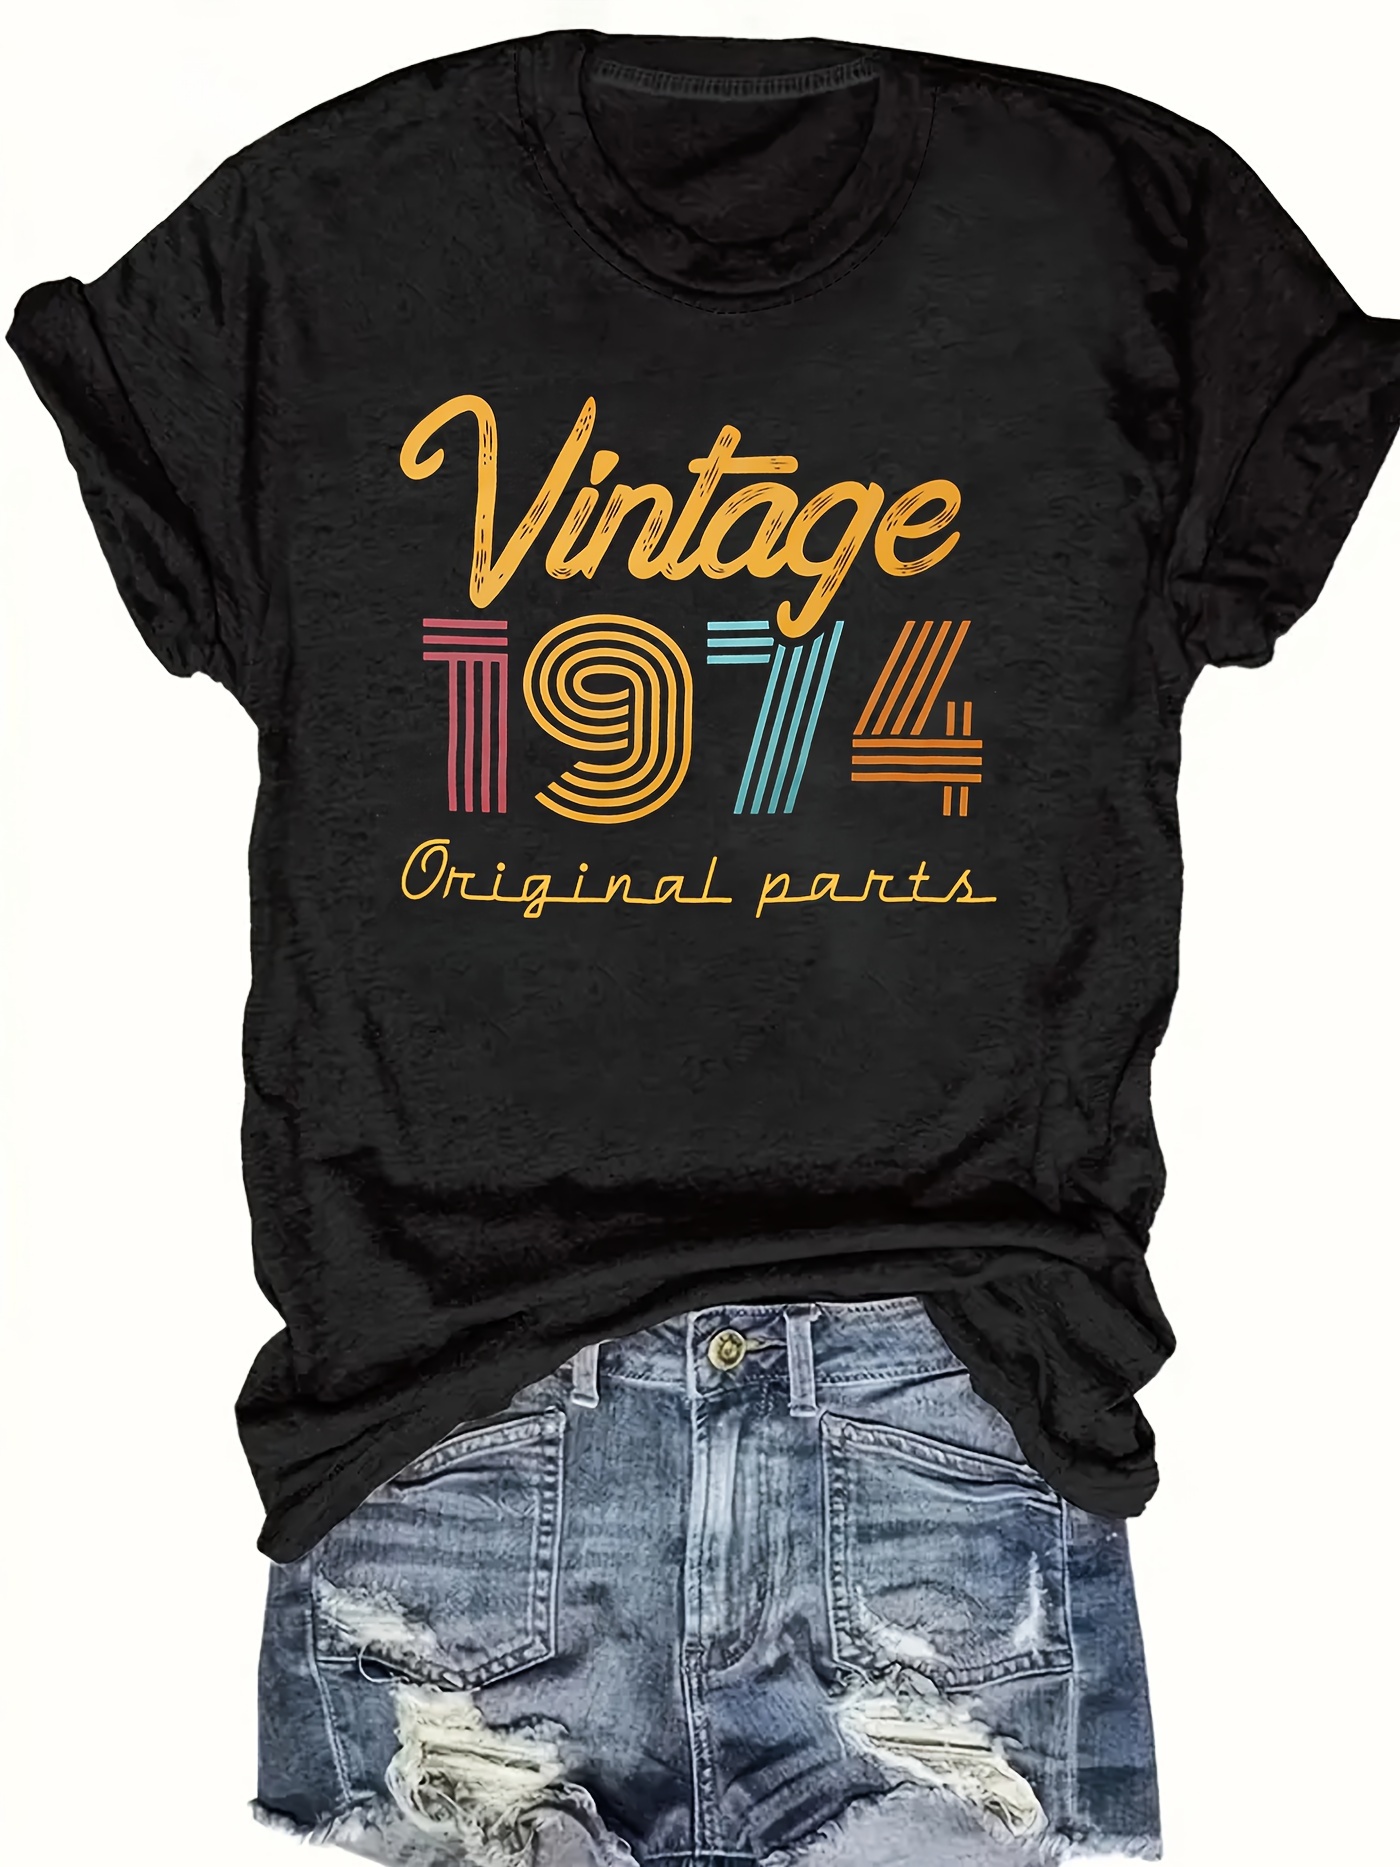 Tank Top Vintage Short 80s Women Top Black With Colorful Patterns Handbag  Items Cotton Tank Top T-shirt Size S/M Vintage French -  Canada